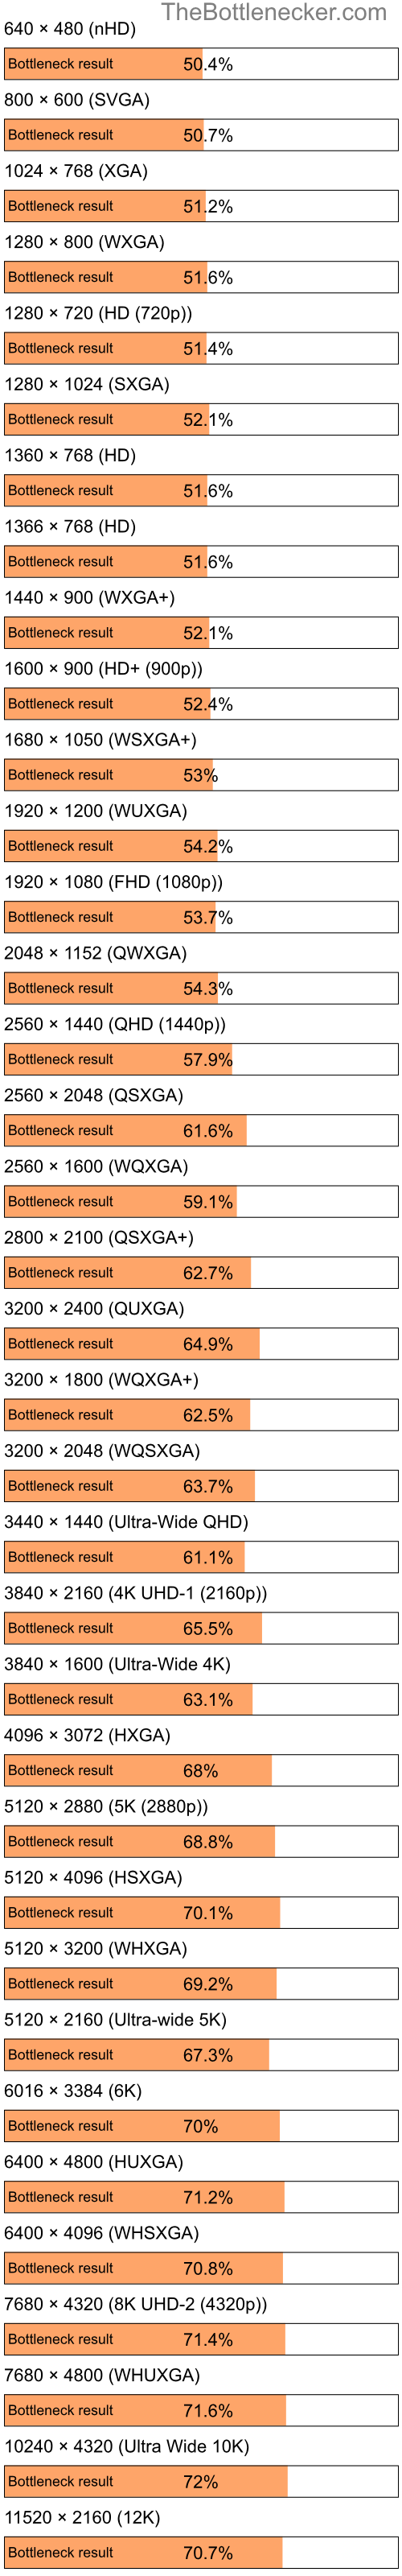 Bottleneck results by resolution for Intel Pentium 4 and NVIDIA Quadro FX 3400 in Processor Intense Tasks